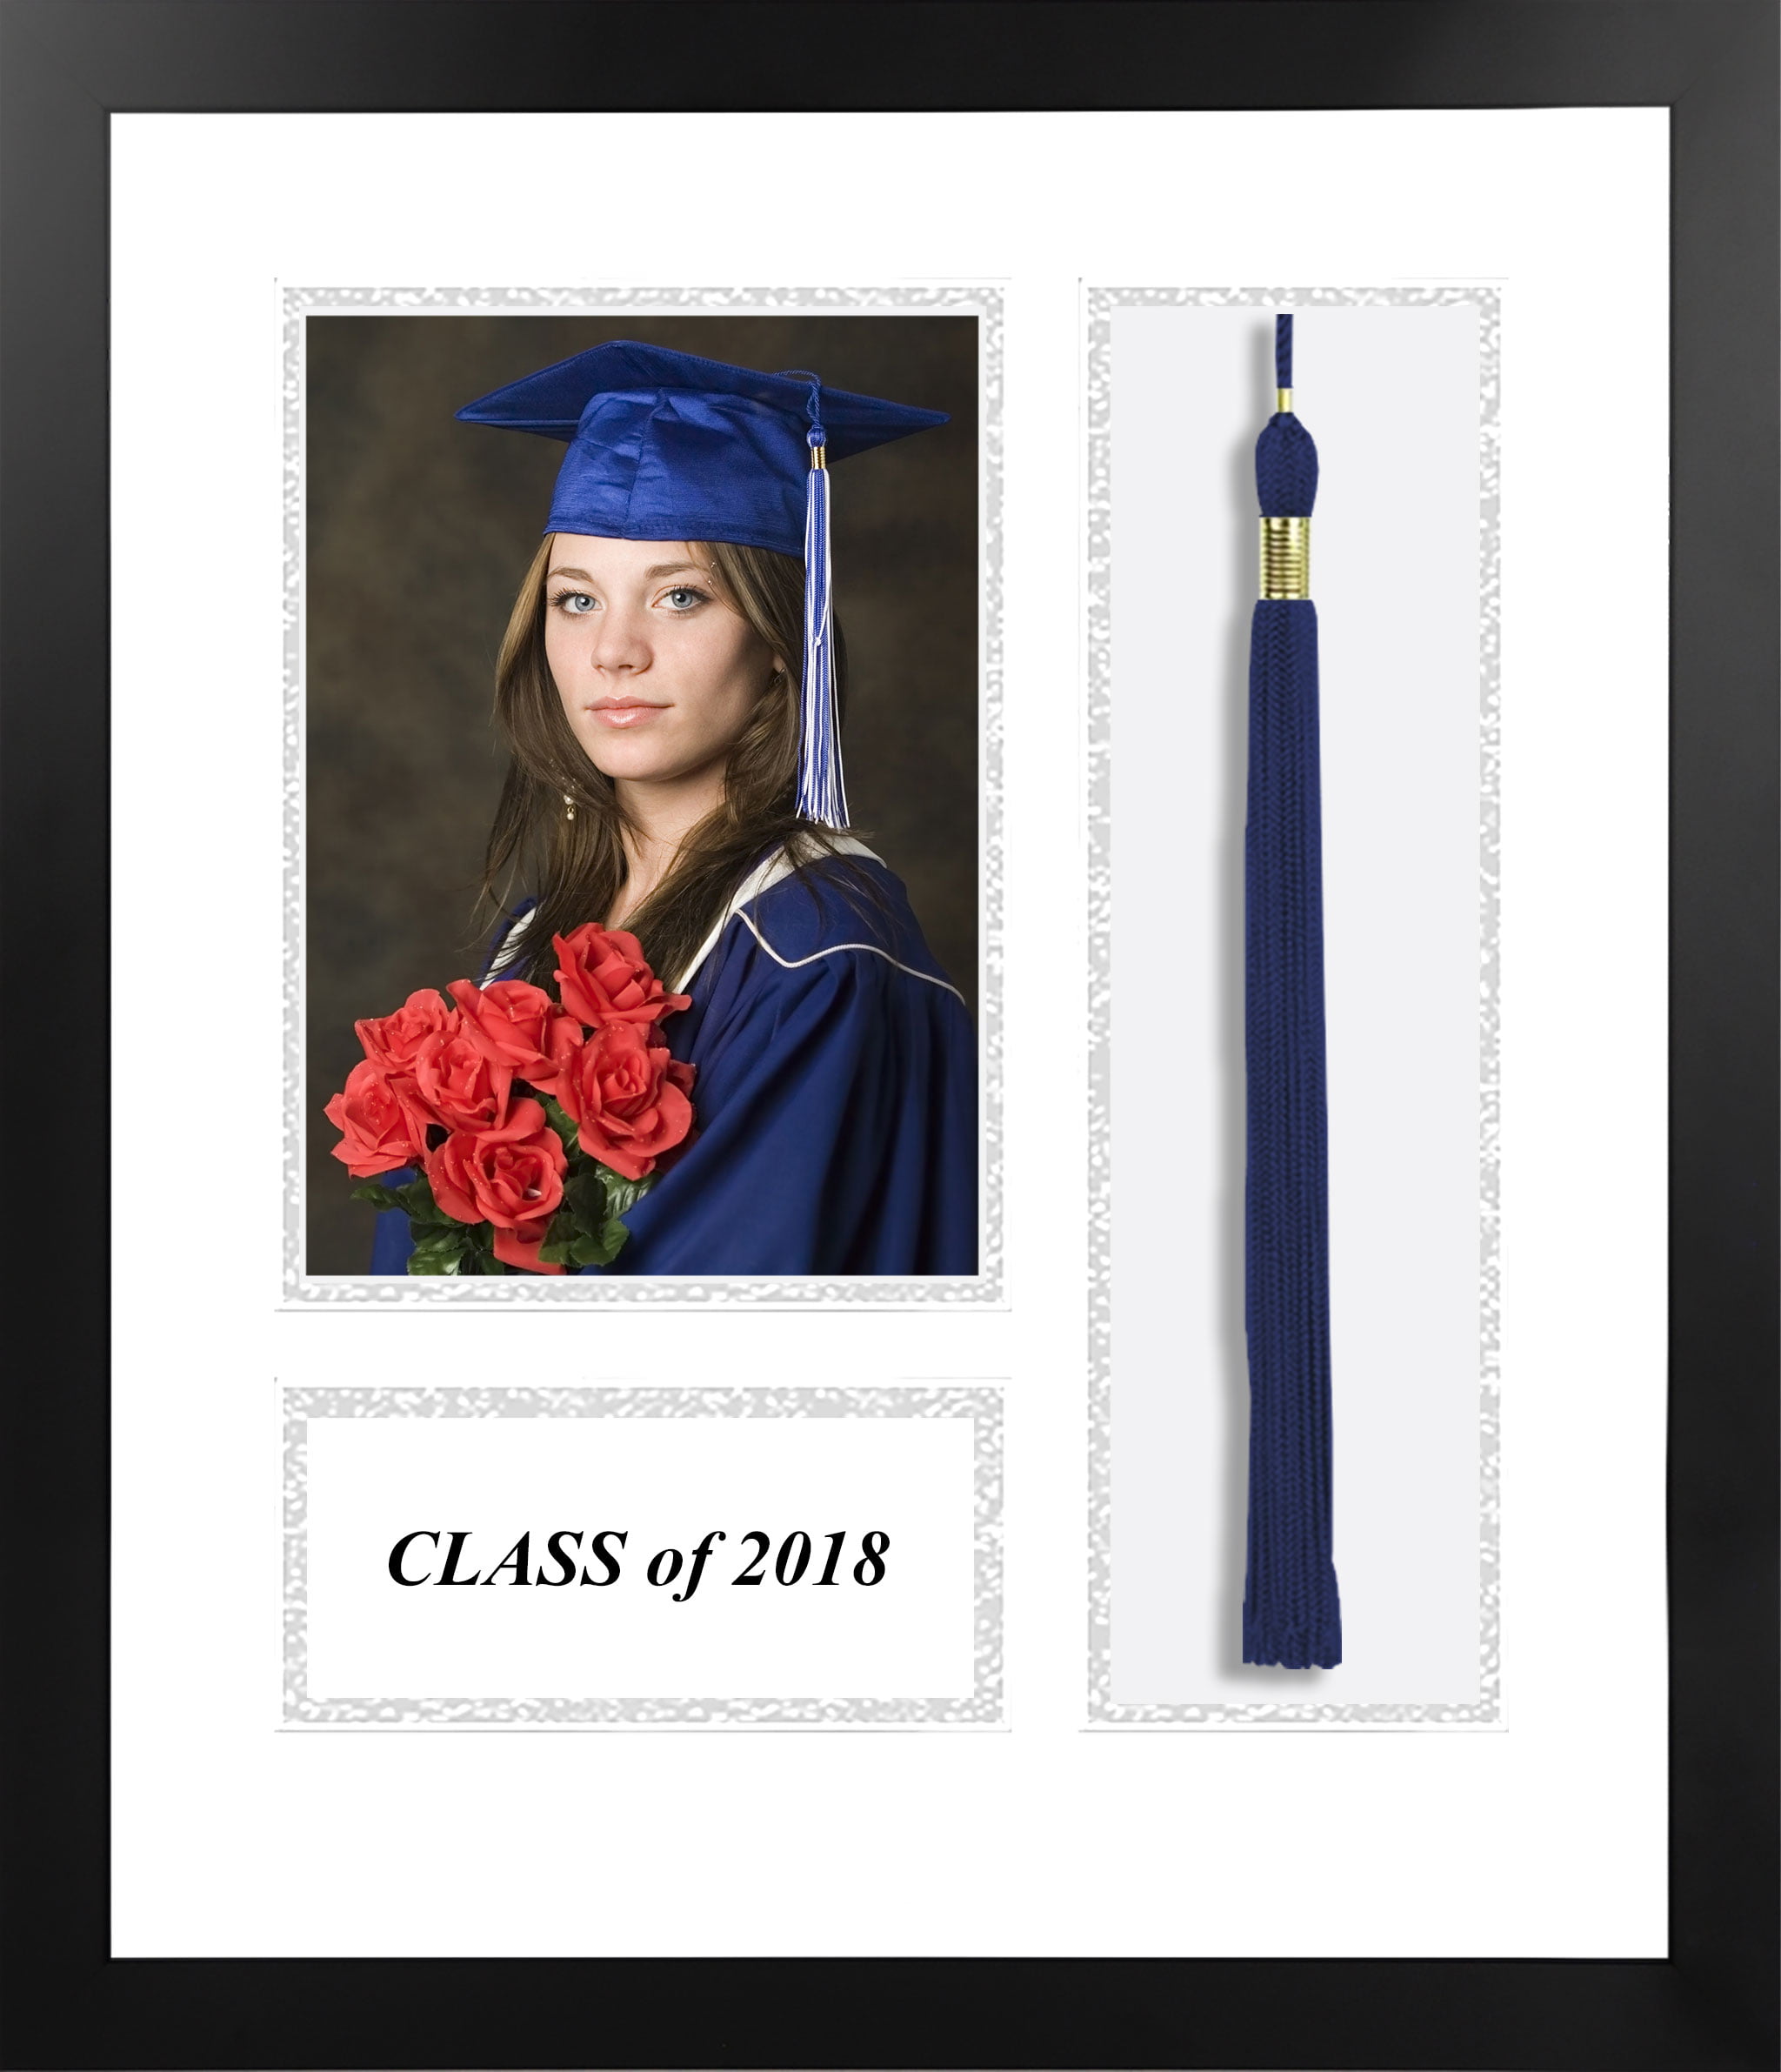 Acfmbkws18 2018 Academic Black Photo Frame, White & Silver Matting With Tassel Opening 5 X 7 In. Photo Opening